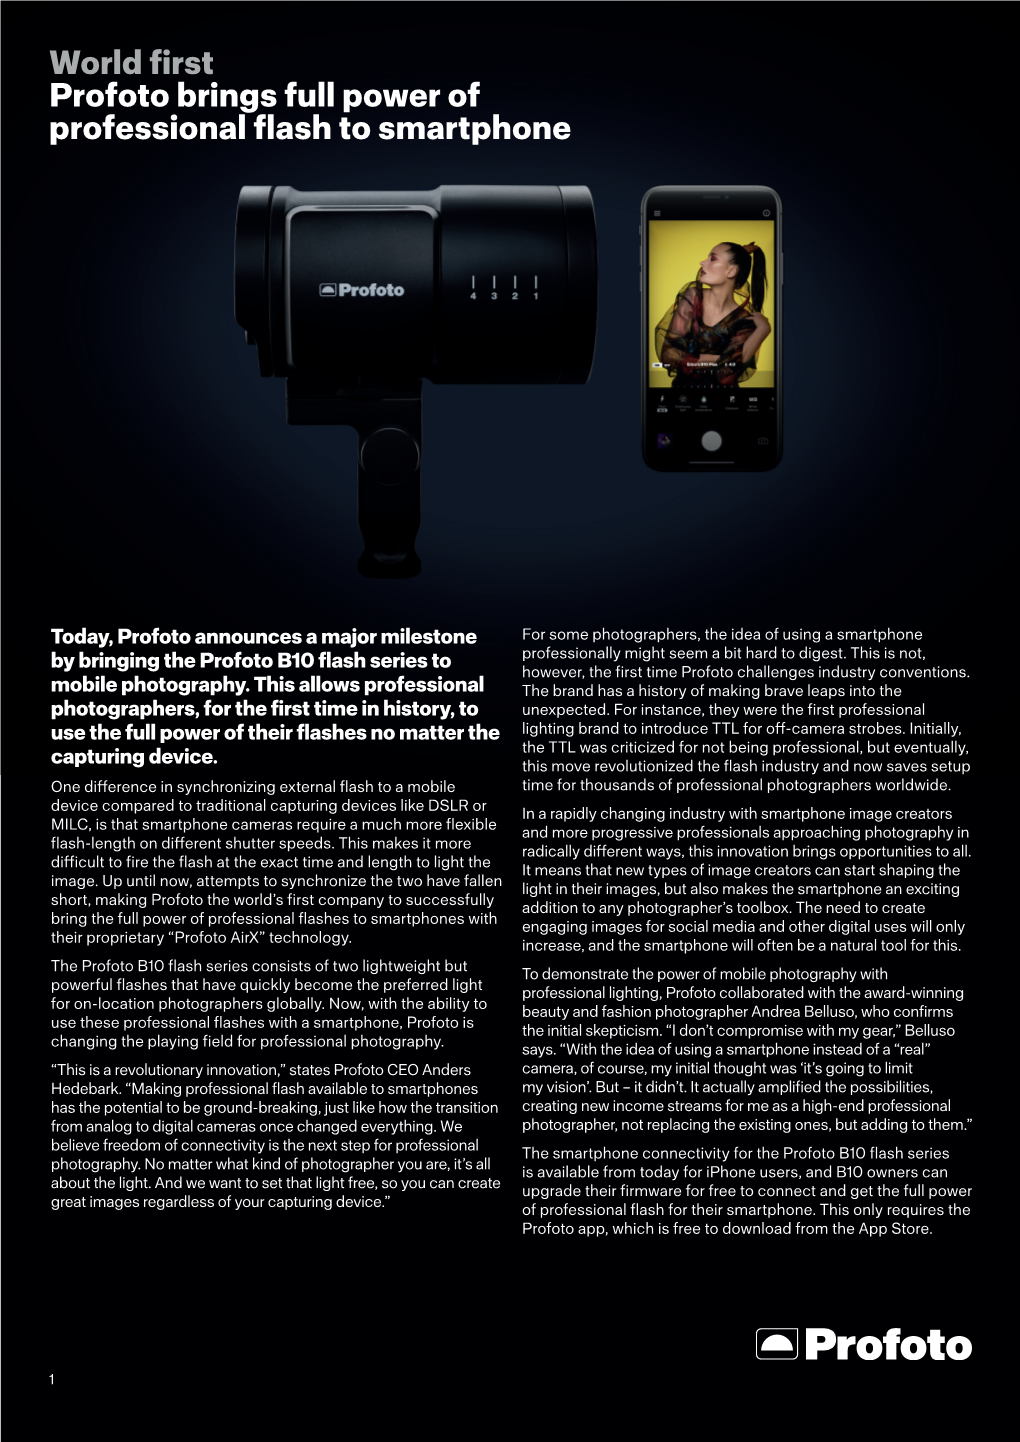 World First Profoto Brings Full Power of Professional Flash to Smartphone